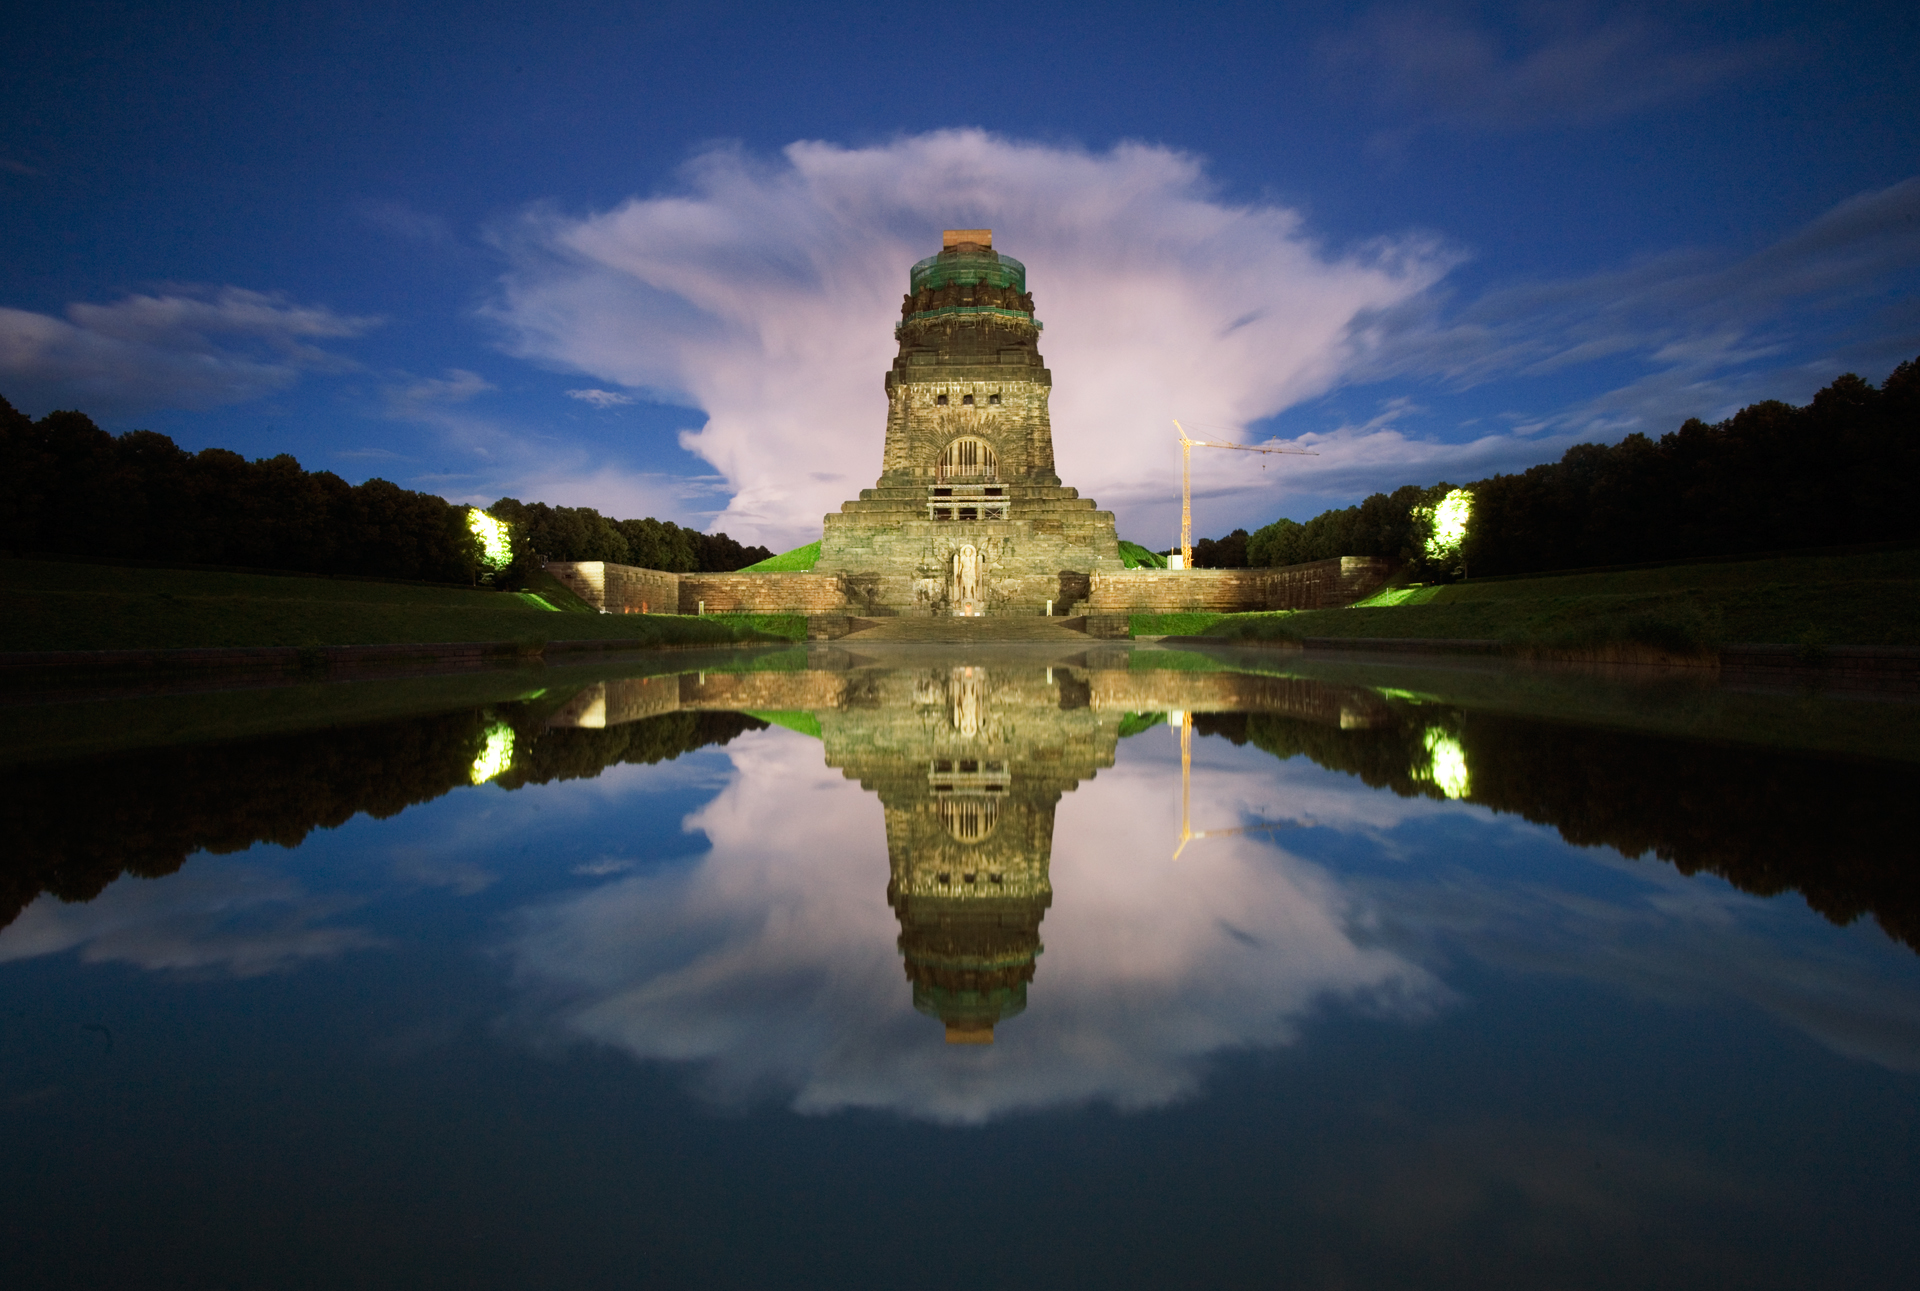  Mirrored in a man-made lake, Leipzig's Völkerschlachtdenkmal memorializes the victory of the allies over Napoleon at the Battle of the Nations in October 1813.  Leipzig, Germany  